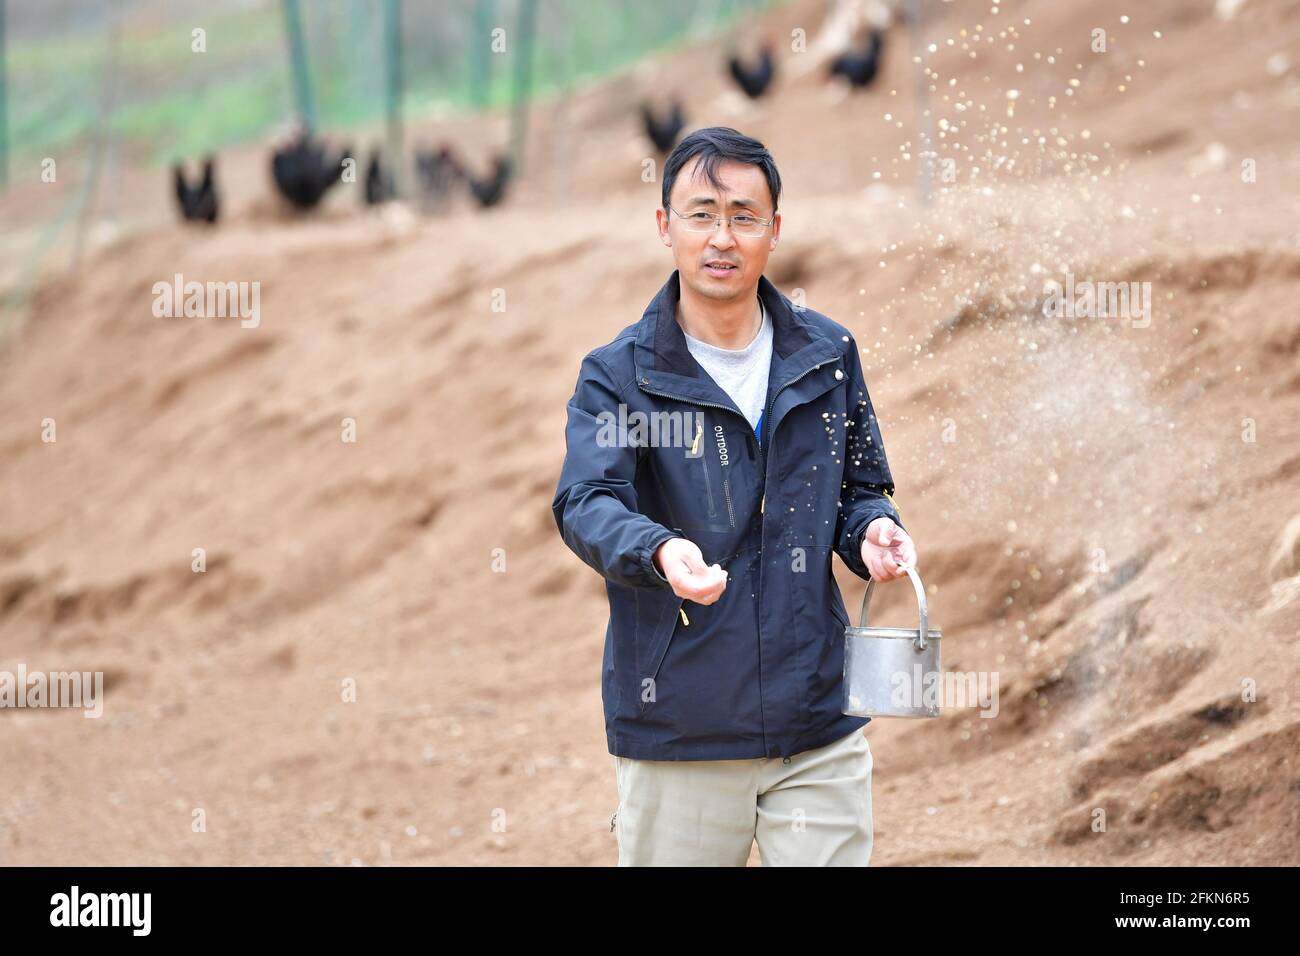 (210503) -- TIANSHUI, May 3, 2021 (Xinhua) -- Zhang Shuhao feeds fowls on the hill of Mudan Township, Tianshui City of northwest China's Gansu Province, on April 27, 2021. Zhang Shuhao, 42, quit his well-paid job three years ago to start an agriculture company with a few partners sharing the same vision at a mountainous village in Mudan Township, Tianshui City. In three years, Xinghuarong, Zhang's company, contracted 6,200 mu (about 413 hectares) of idle arable lands, where terraced fields, greenhouses, and a reservoir have been built to grow diverse produces ranging from traditional Chinese Stock Photo